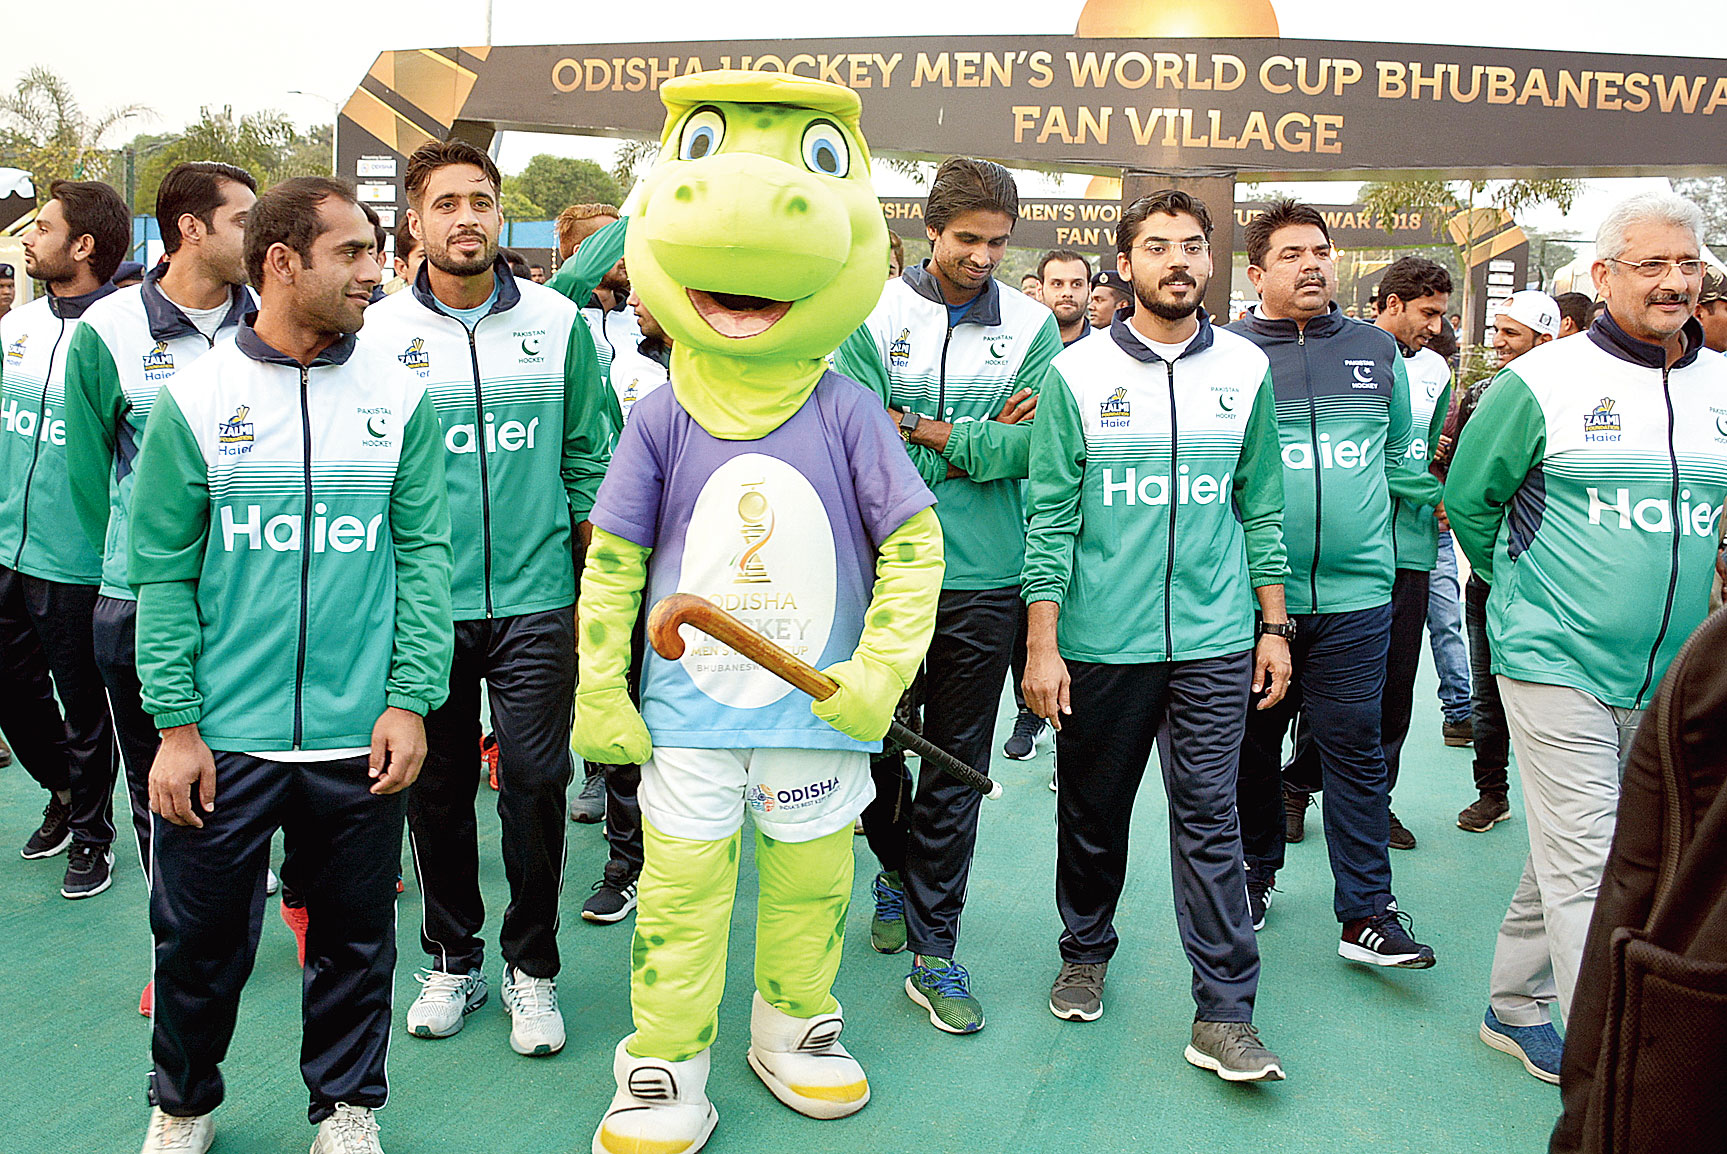 Pakistan team members pose with Olly, the mascot for sport events in Odisha, at Fan Village in Bhubaneswar on Monday.